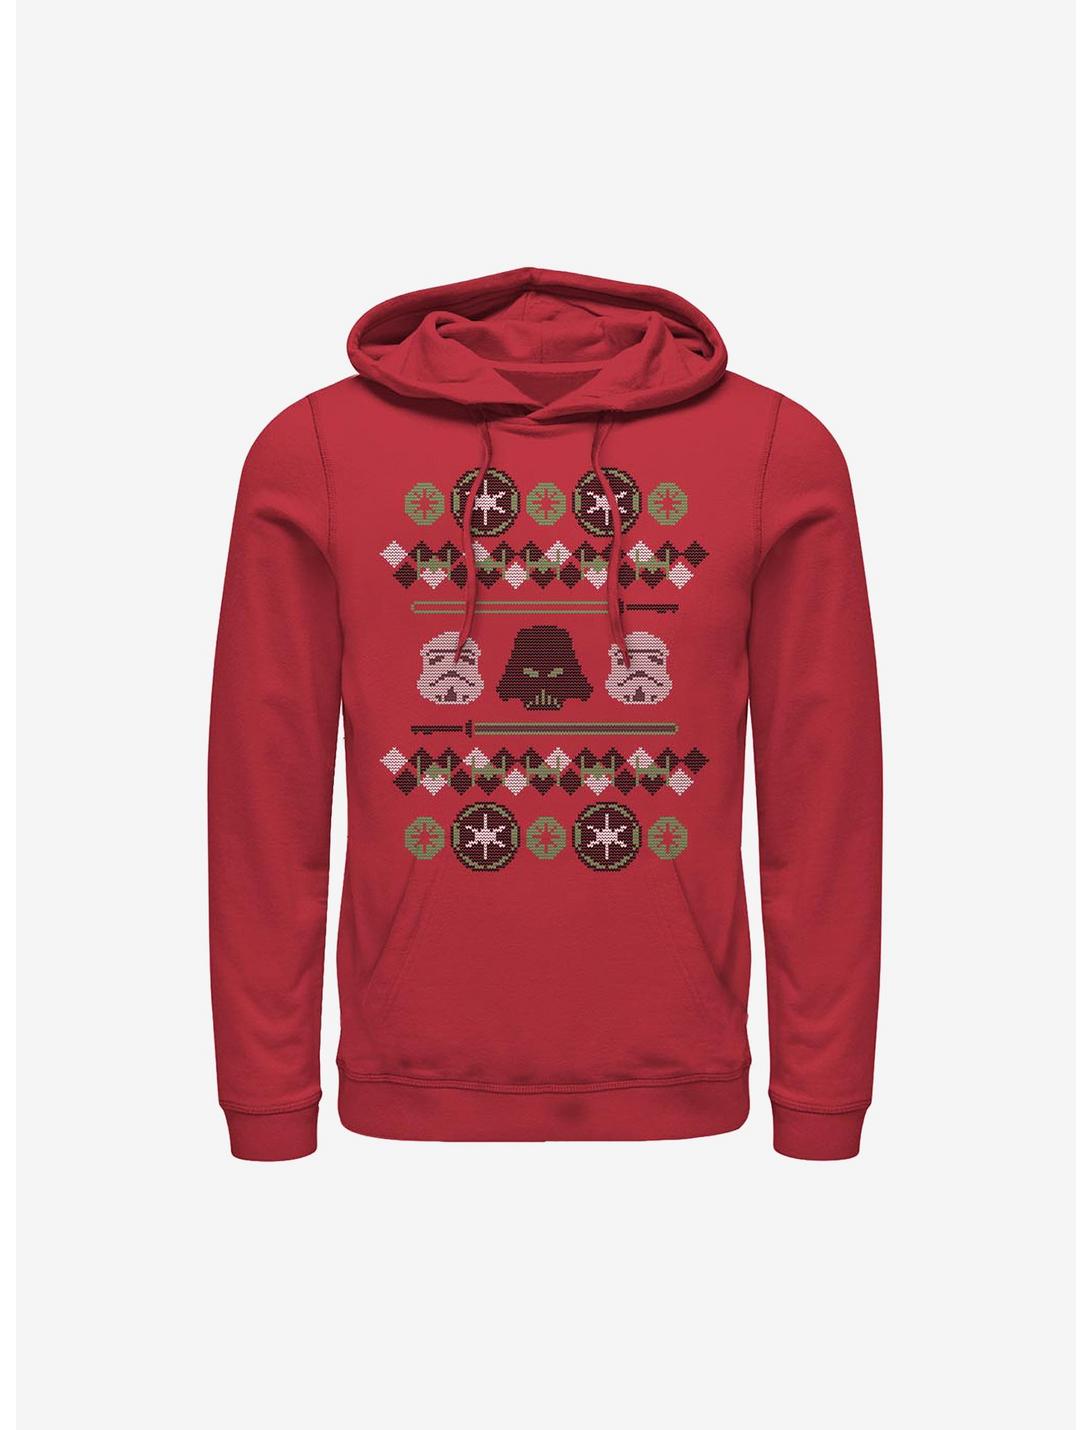 Star Wars Empire Holiday Ugly Christmas Sweater Hoodie, RED, hi-res